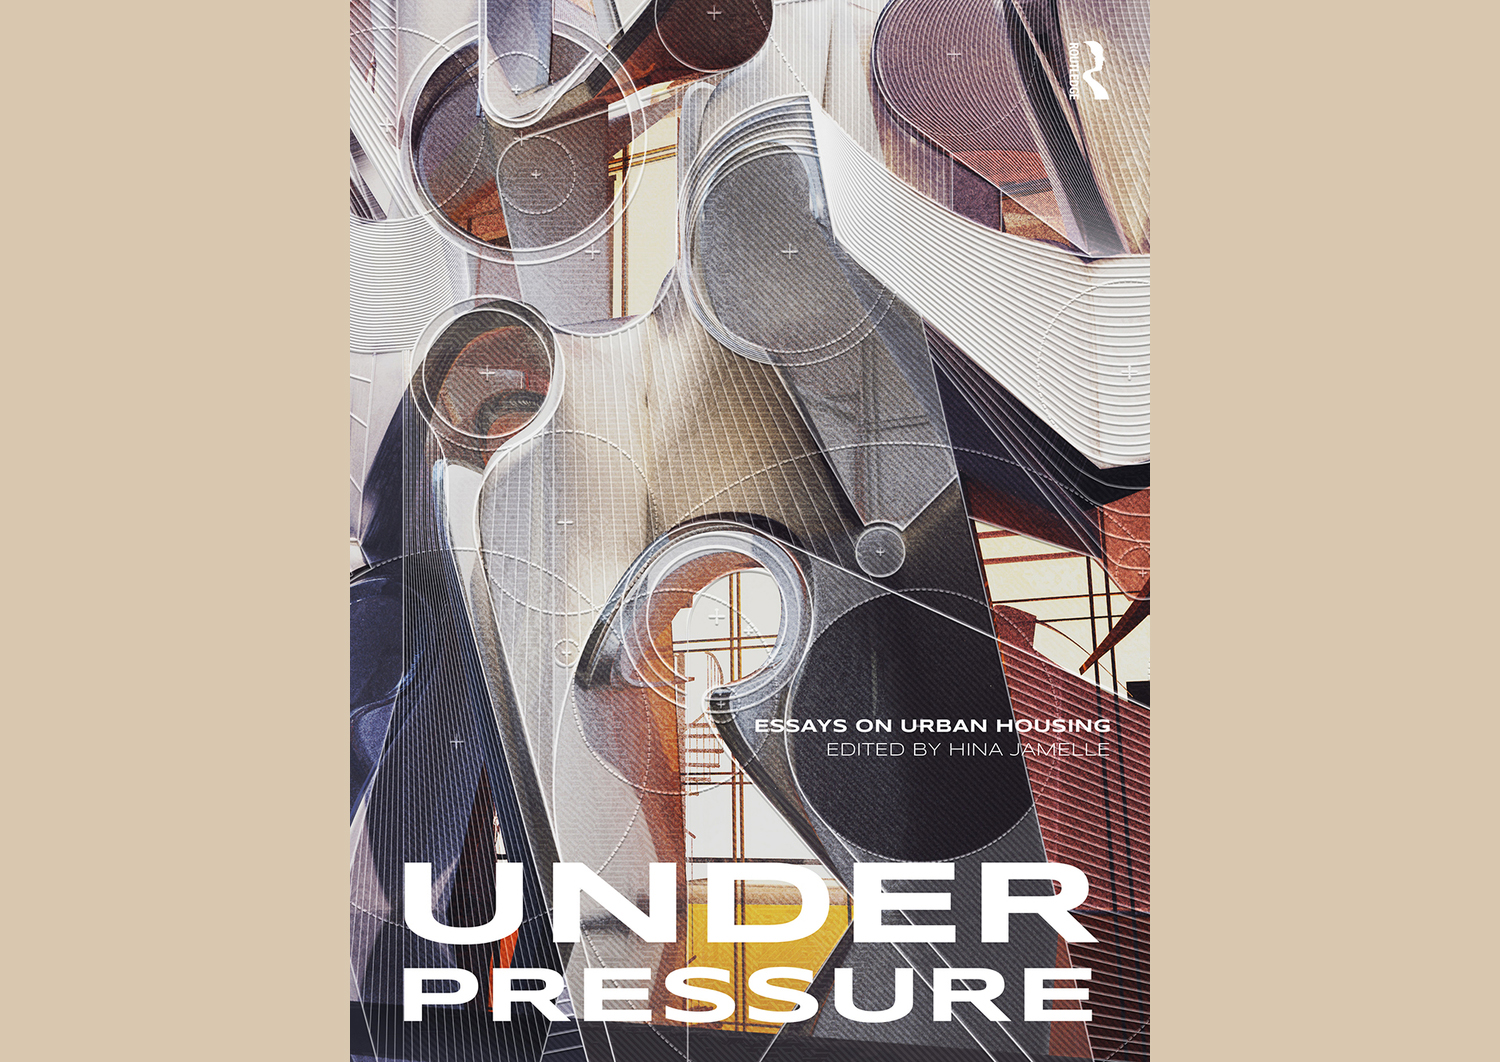 Book cover for Under Pressure: Essays on Urban Housing, edited by Hina Jamelle.